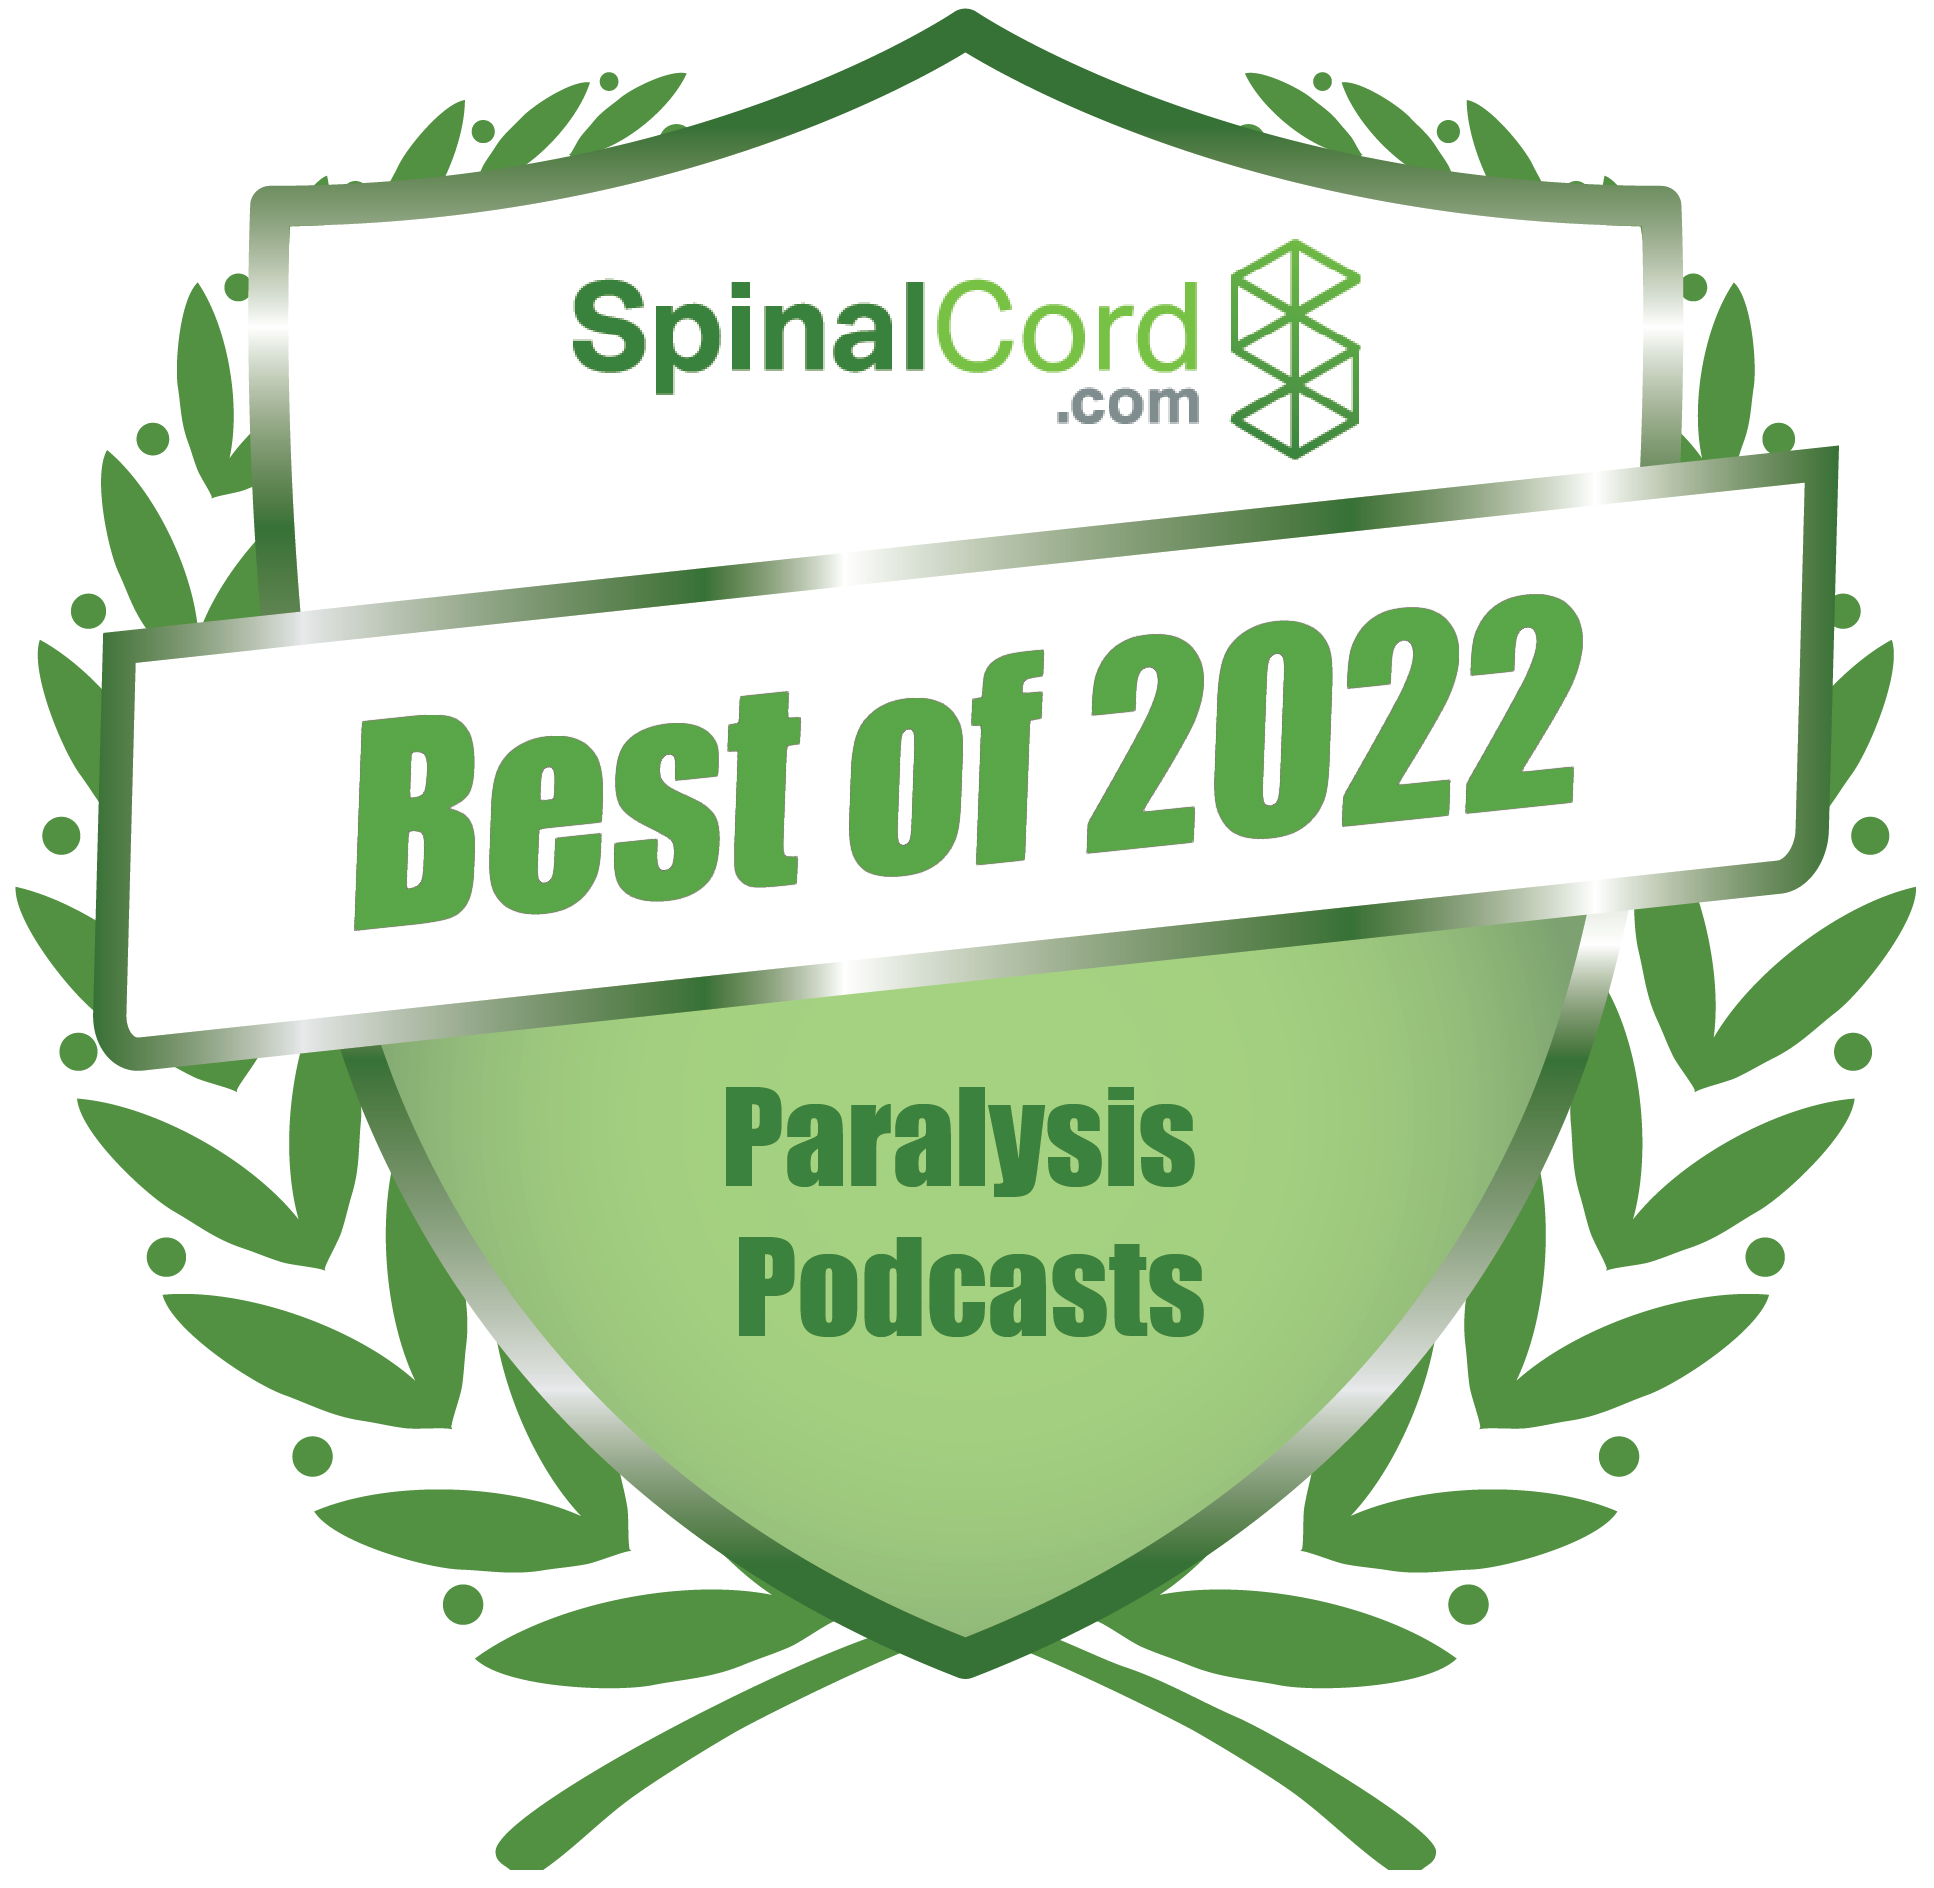 Spinalcord.com Best of Awards Paralysis Podcasts